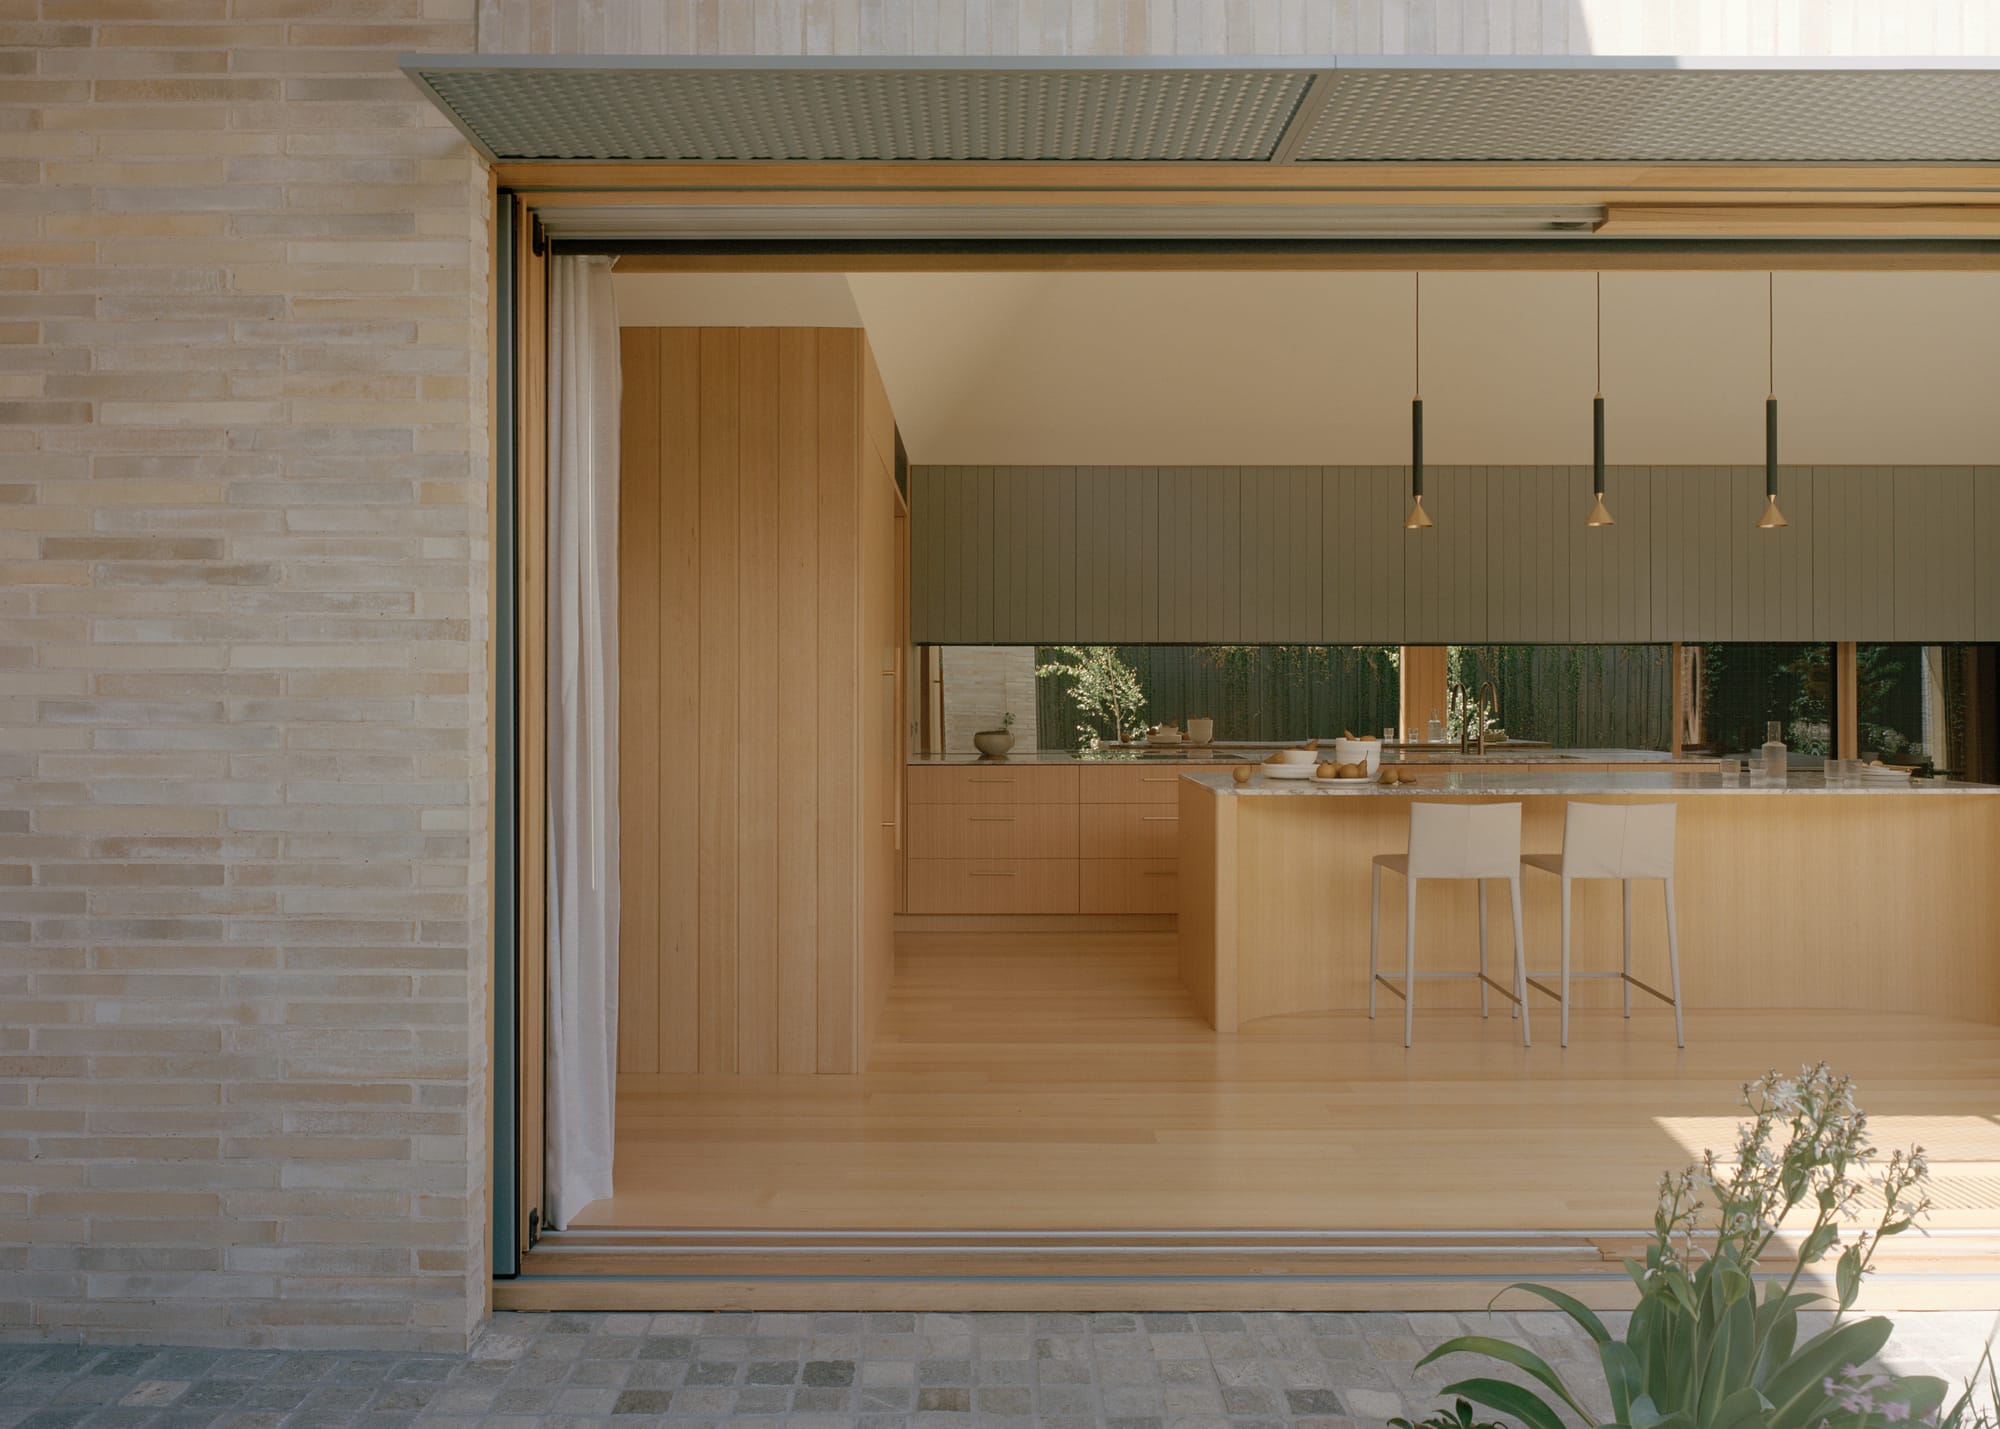 Gable Park by Weaver+Co Architects. Photography by Tasha Tylee. View from enclosed courtyard into kitchen in residential home. Timber floors, walls and cabinetry. Light brick wall exterior.